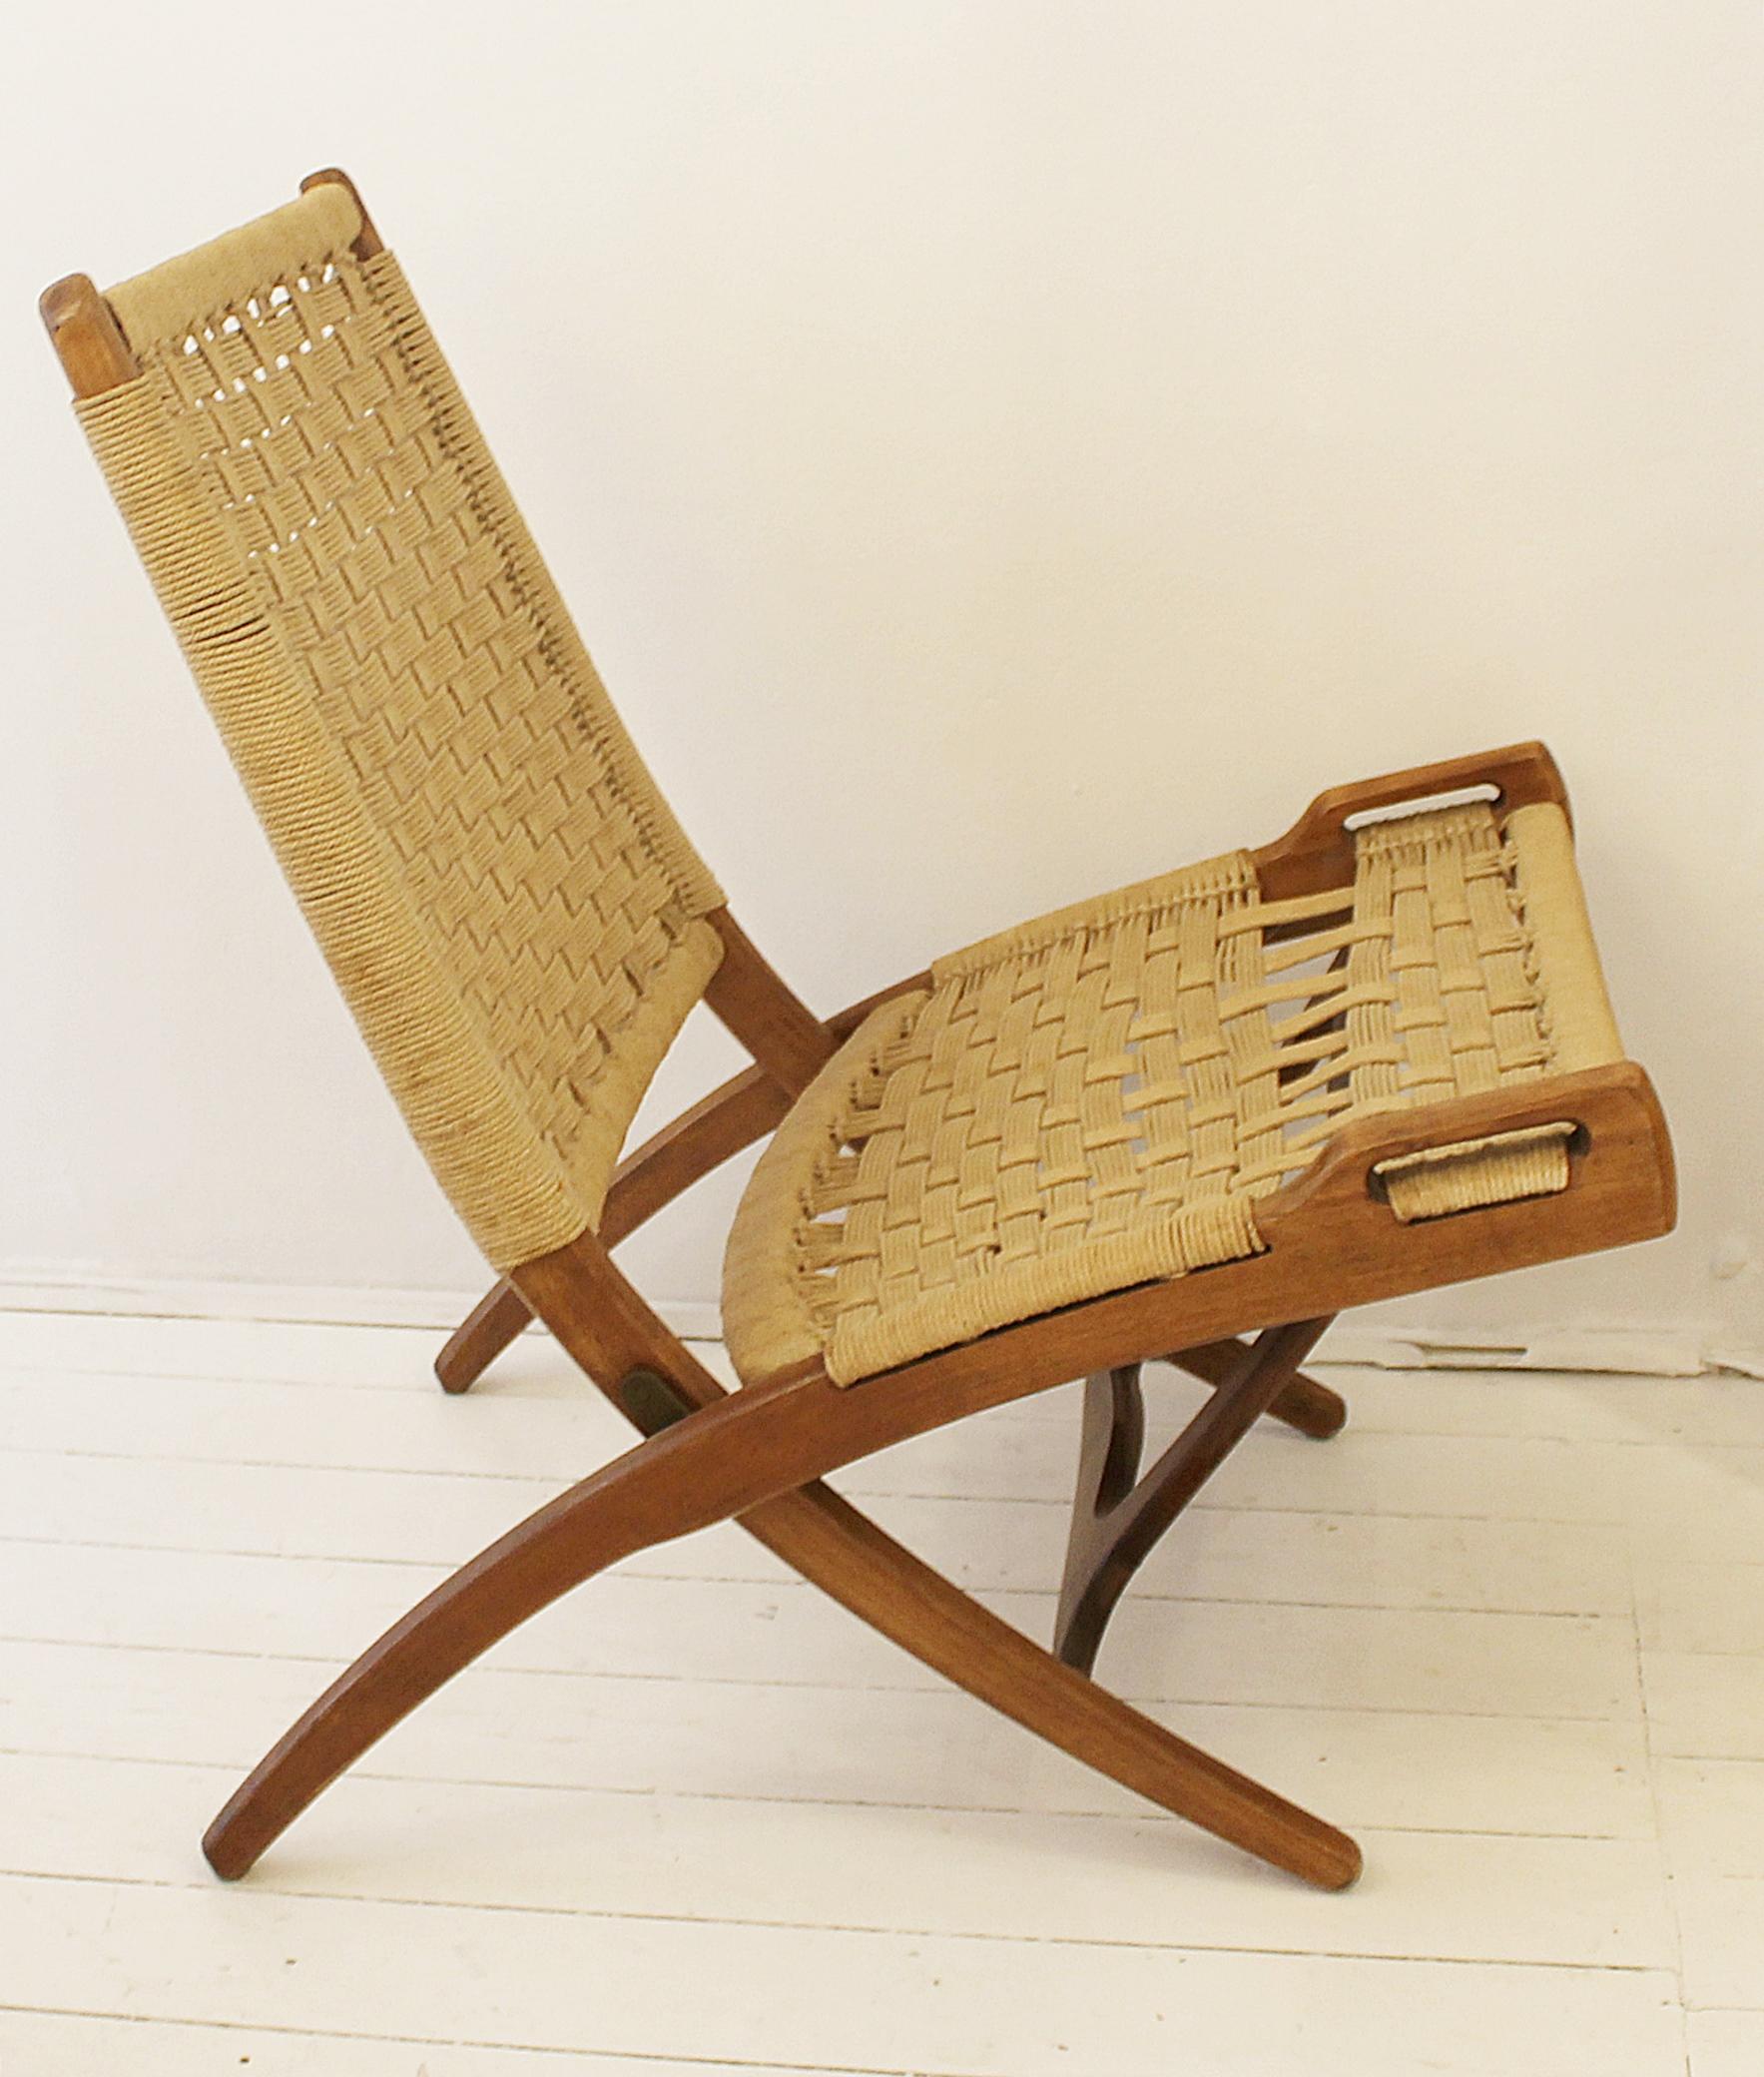 Pair of foldable armchair in wood and rope in style of Gio Ponti.